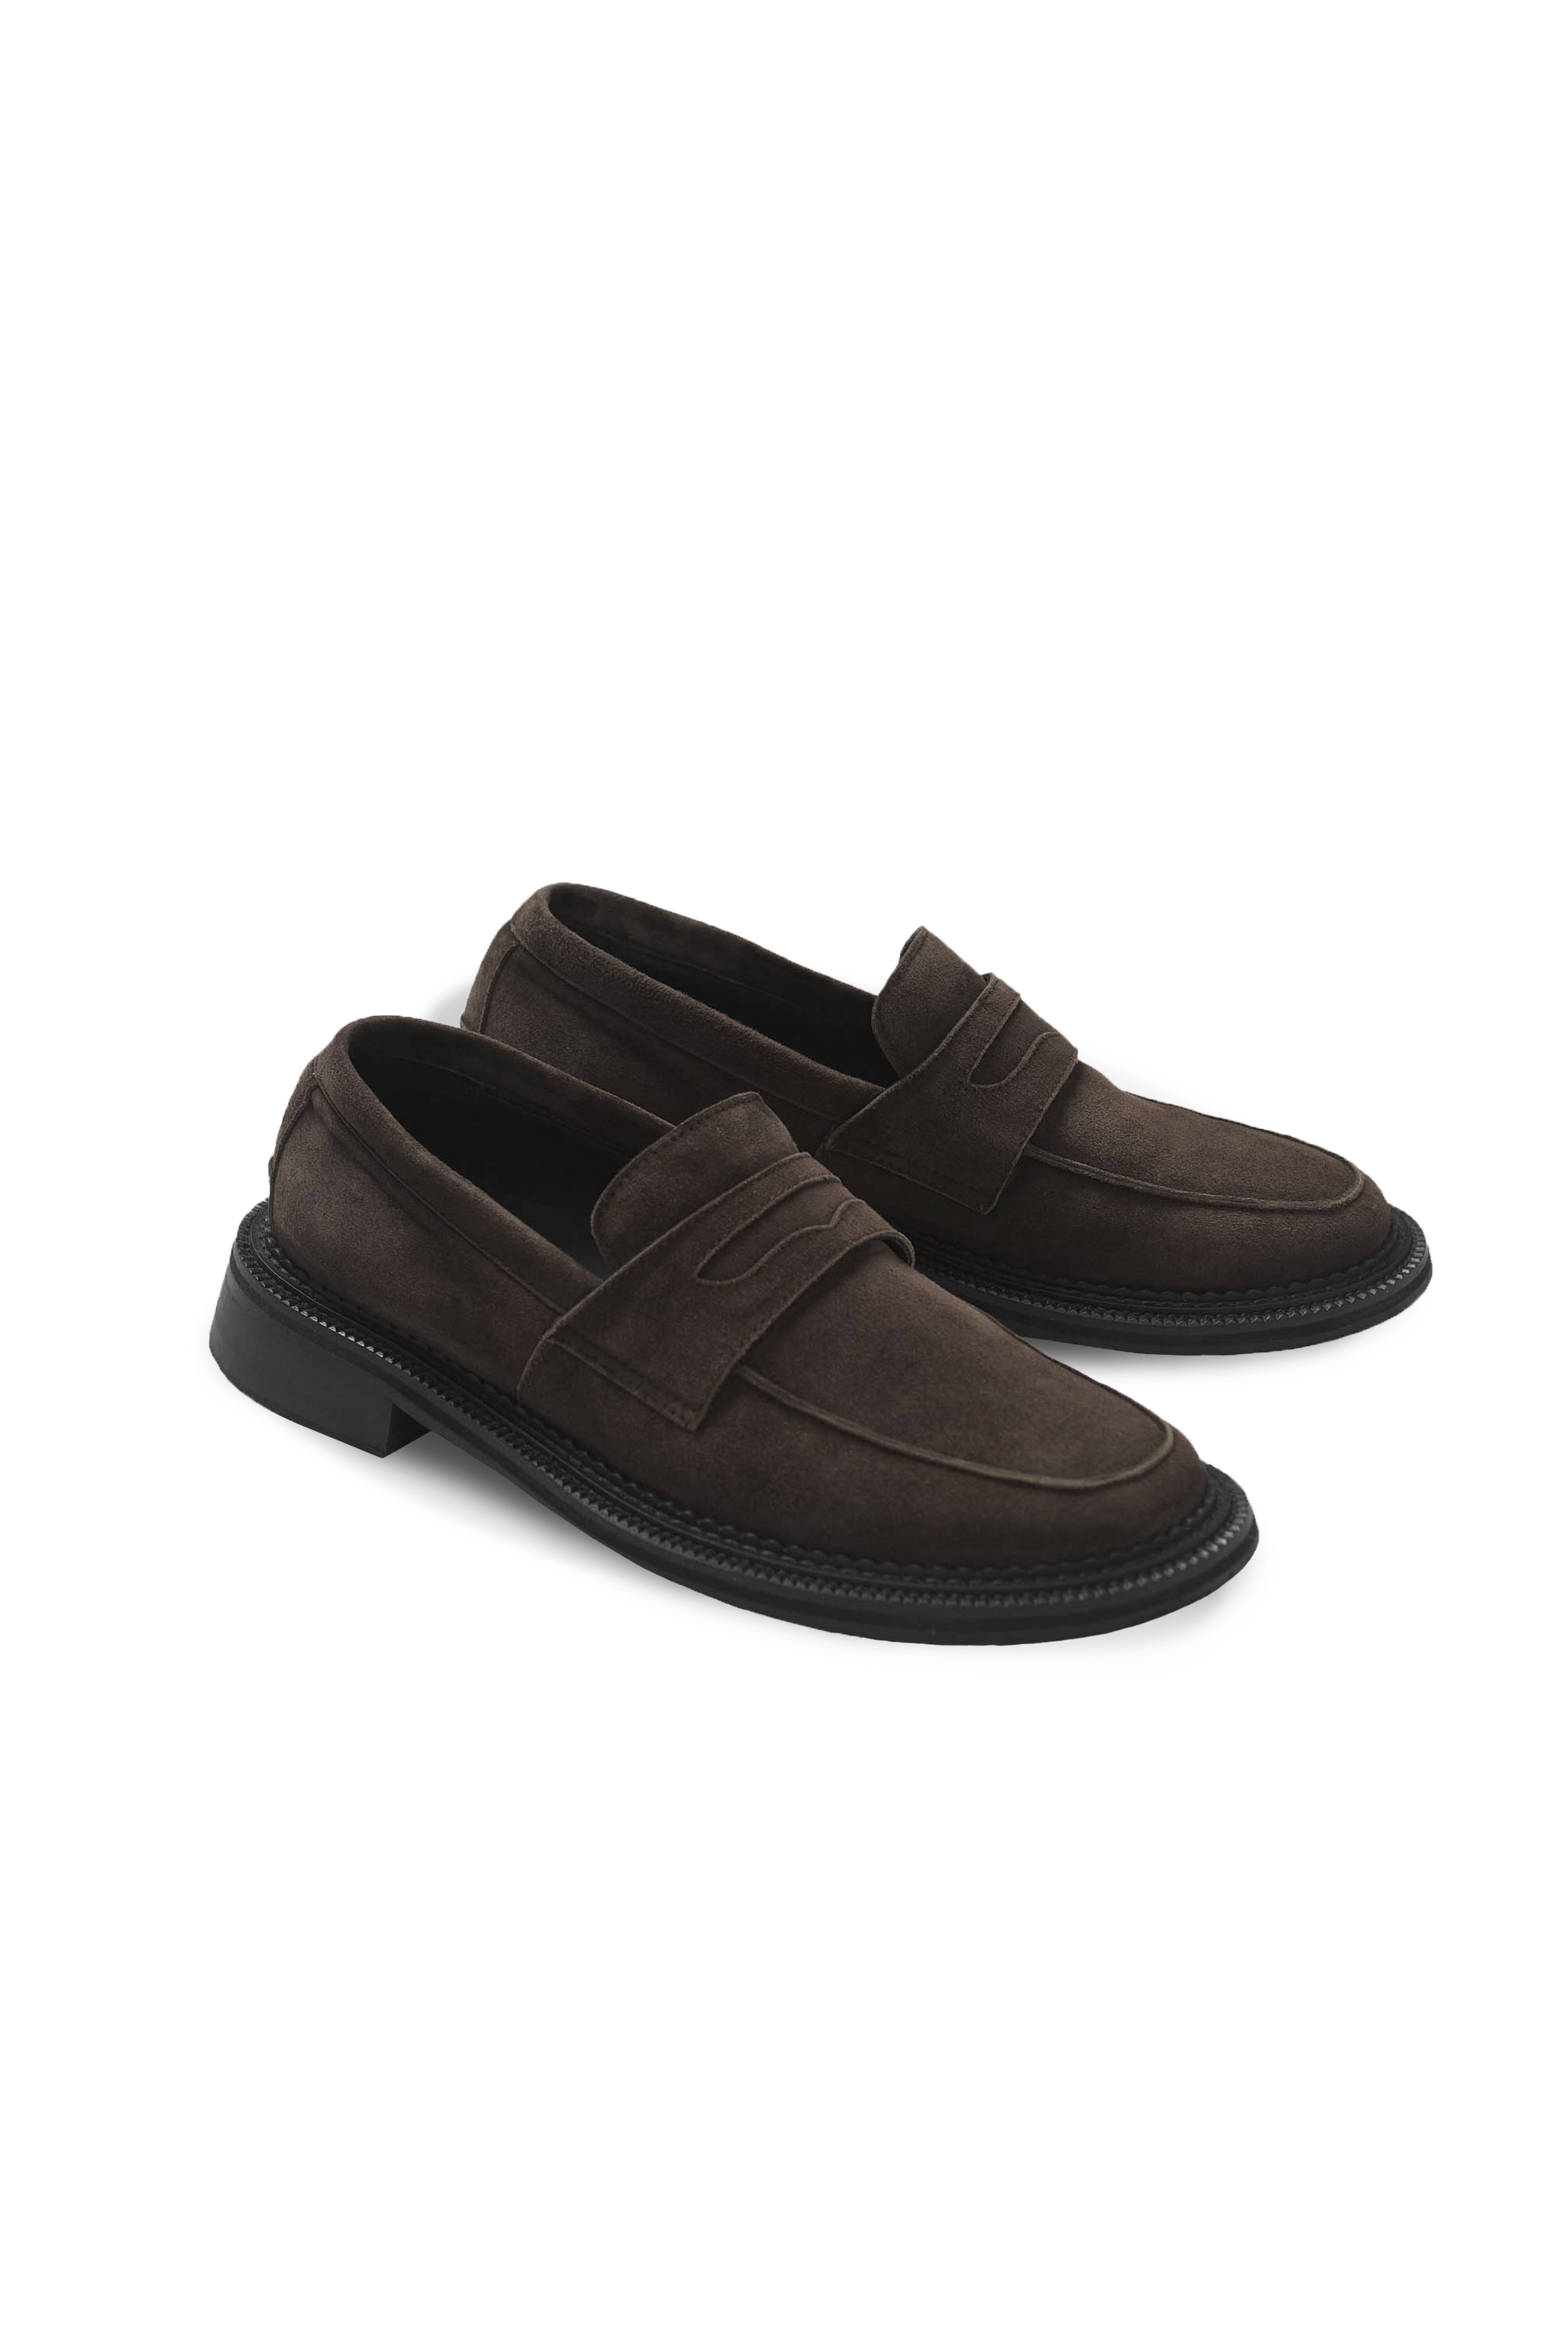 Suede Peny Loafers Brown (12월 12일 순차 발송)